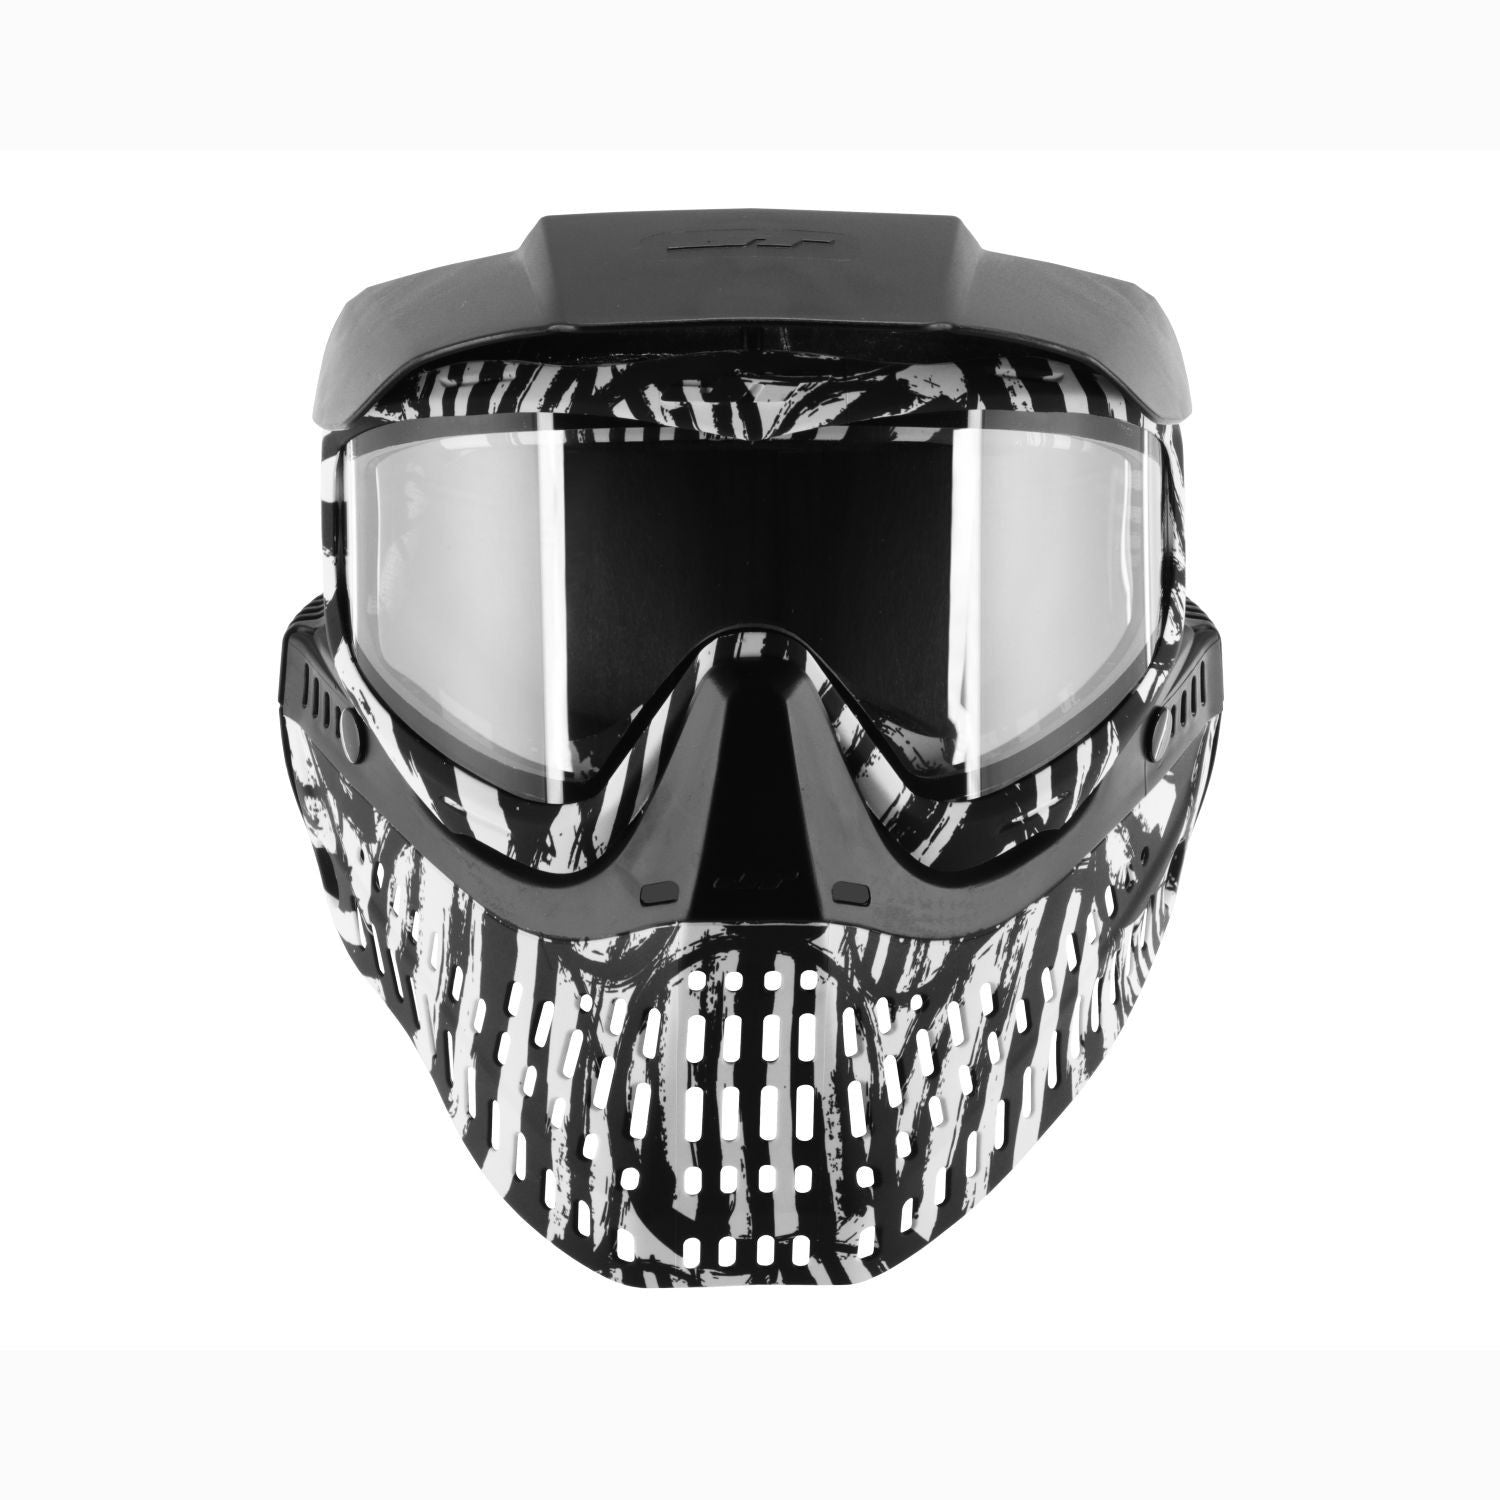 JT Proflex - Special Edition Thermal Masks